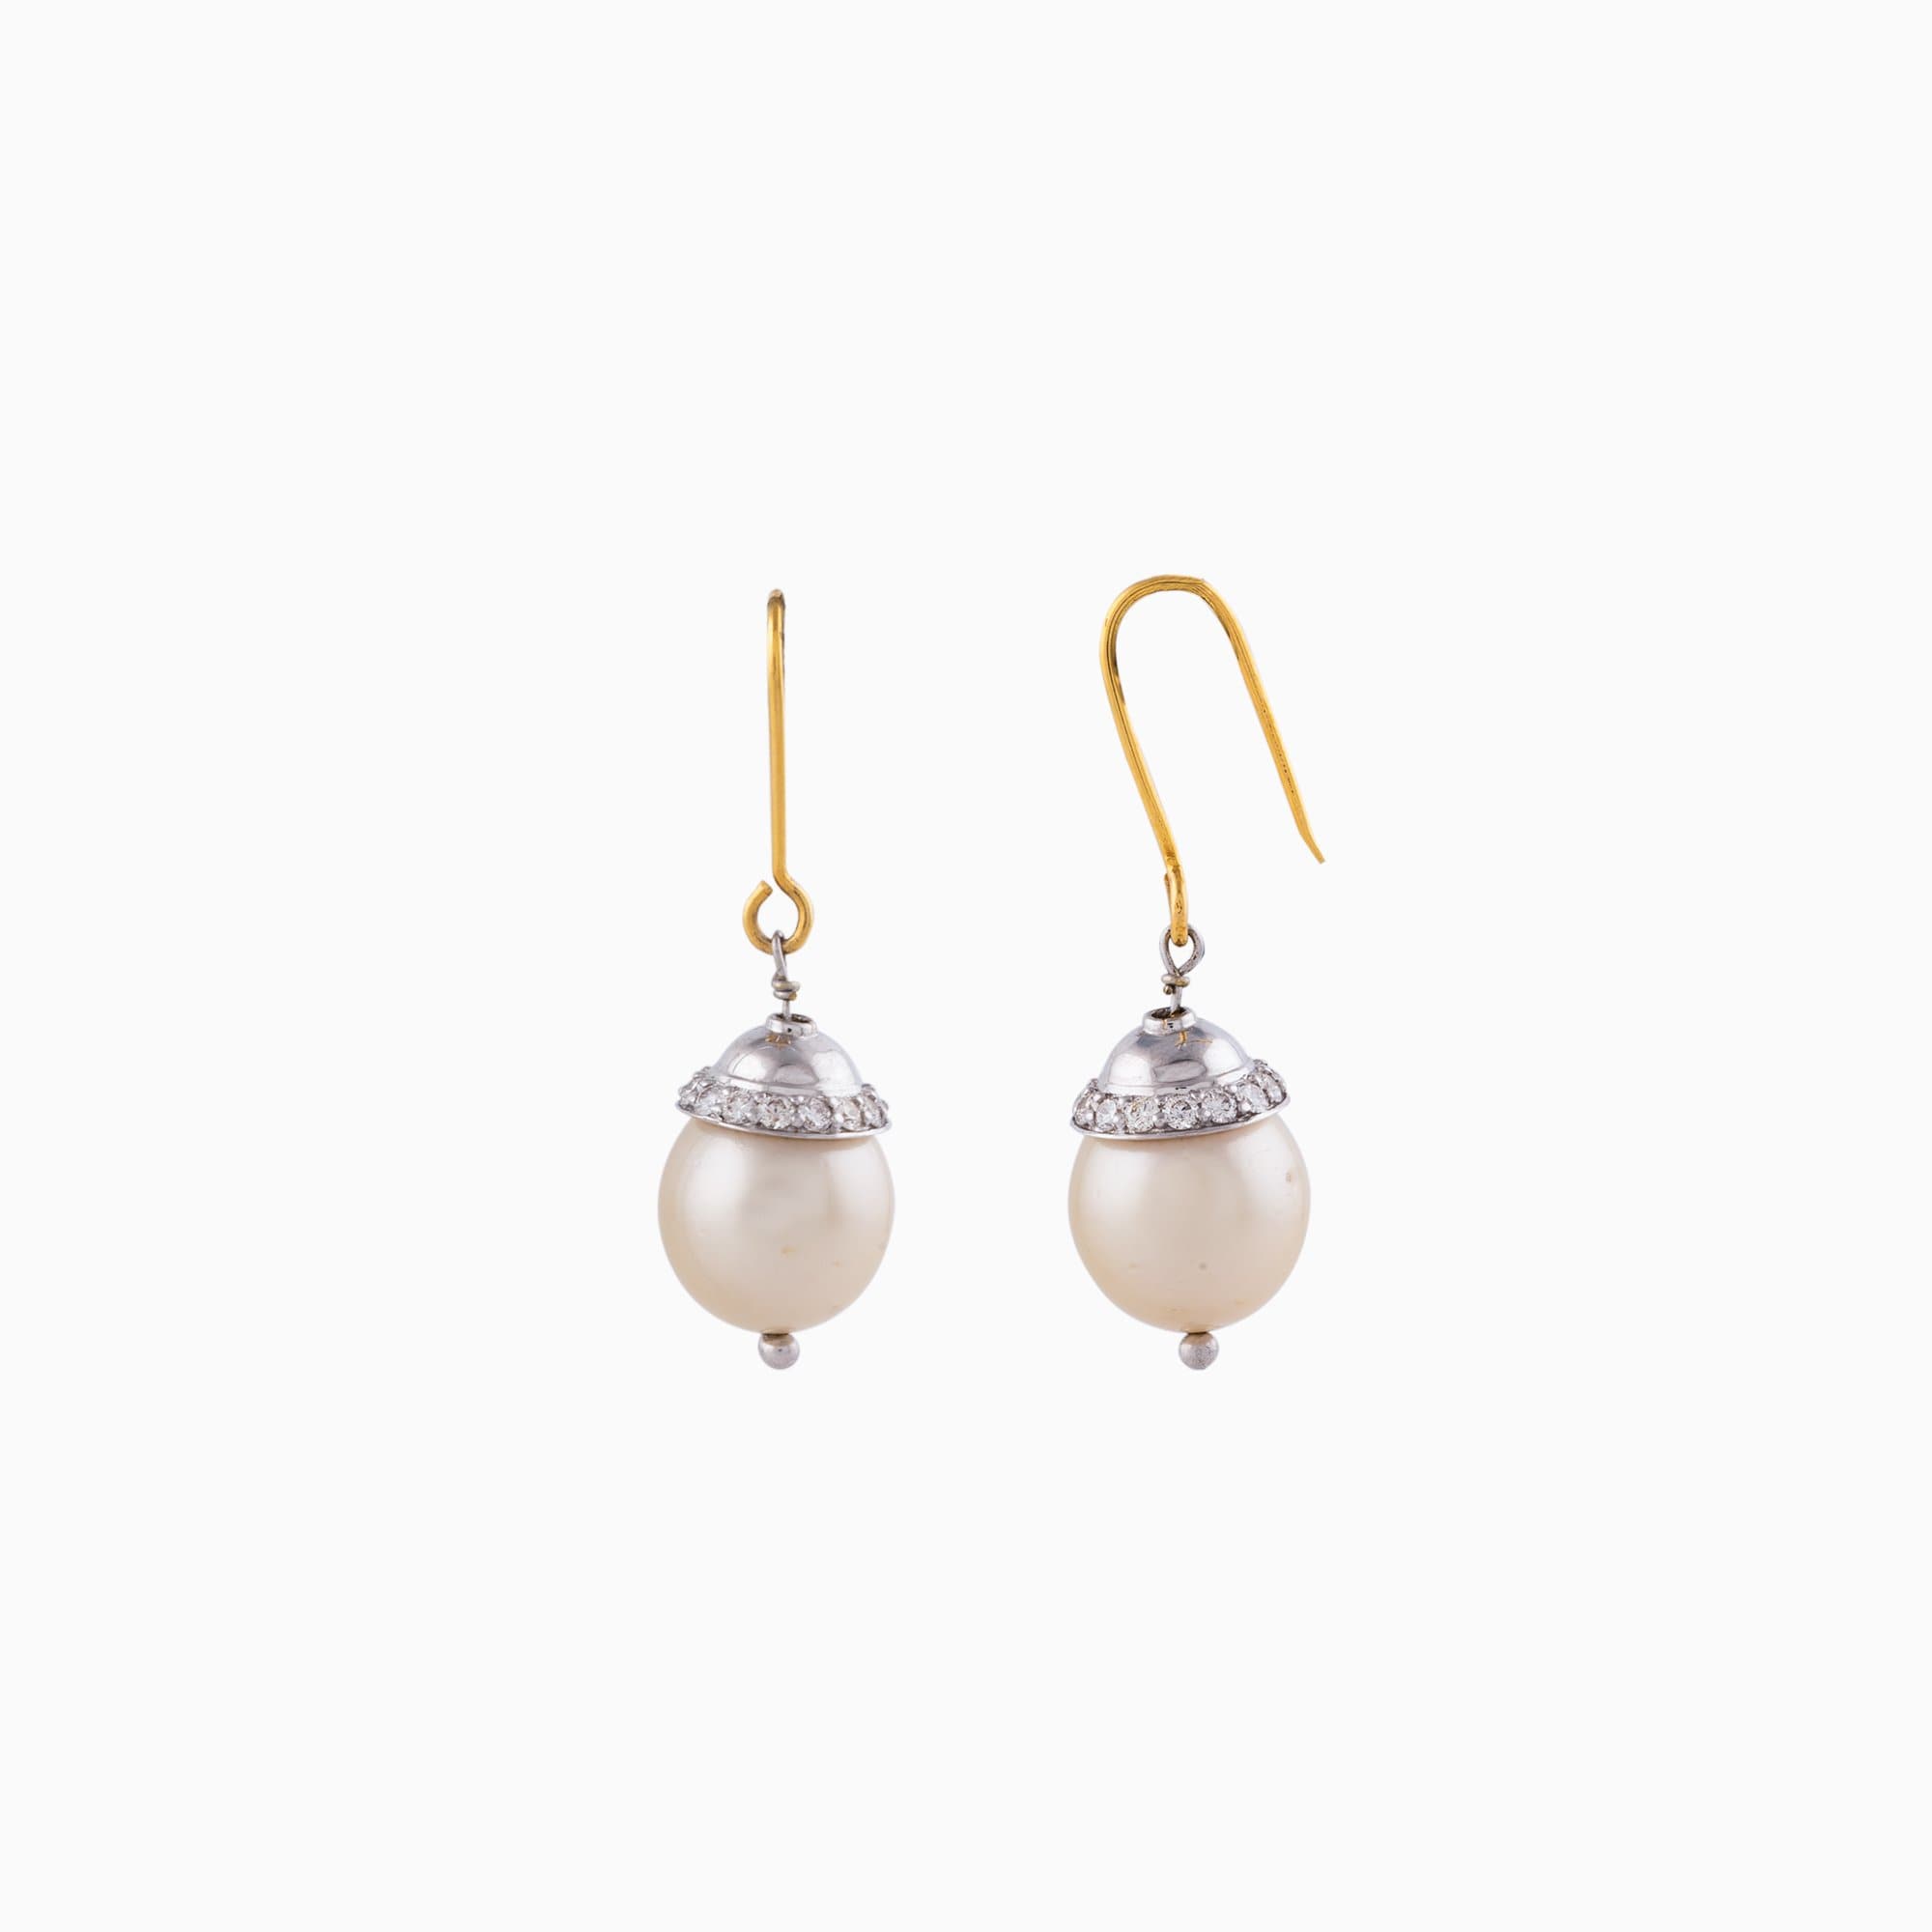 Earring pair with Round Cut Diamond and S.S. Pearls with Gold Aakada-WDN063